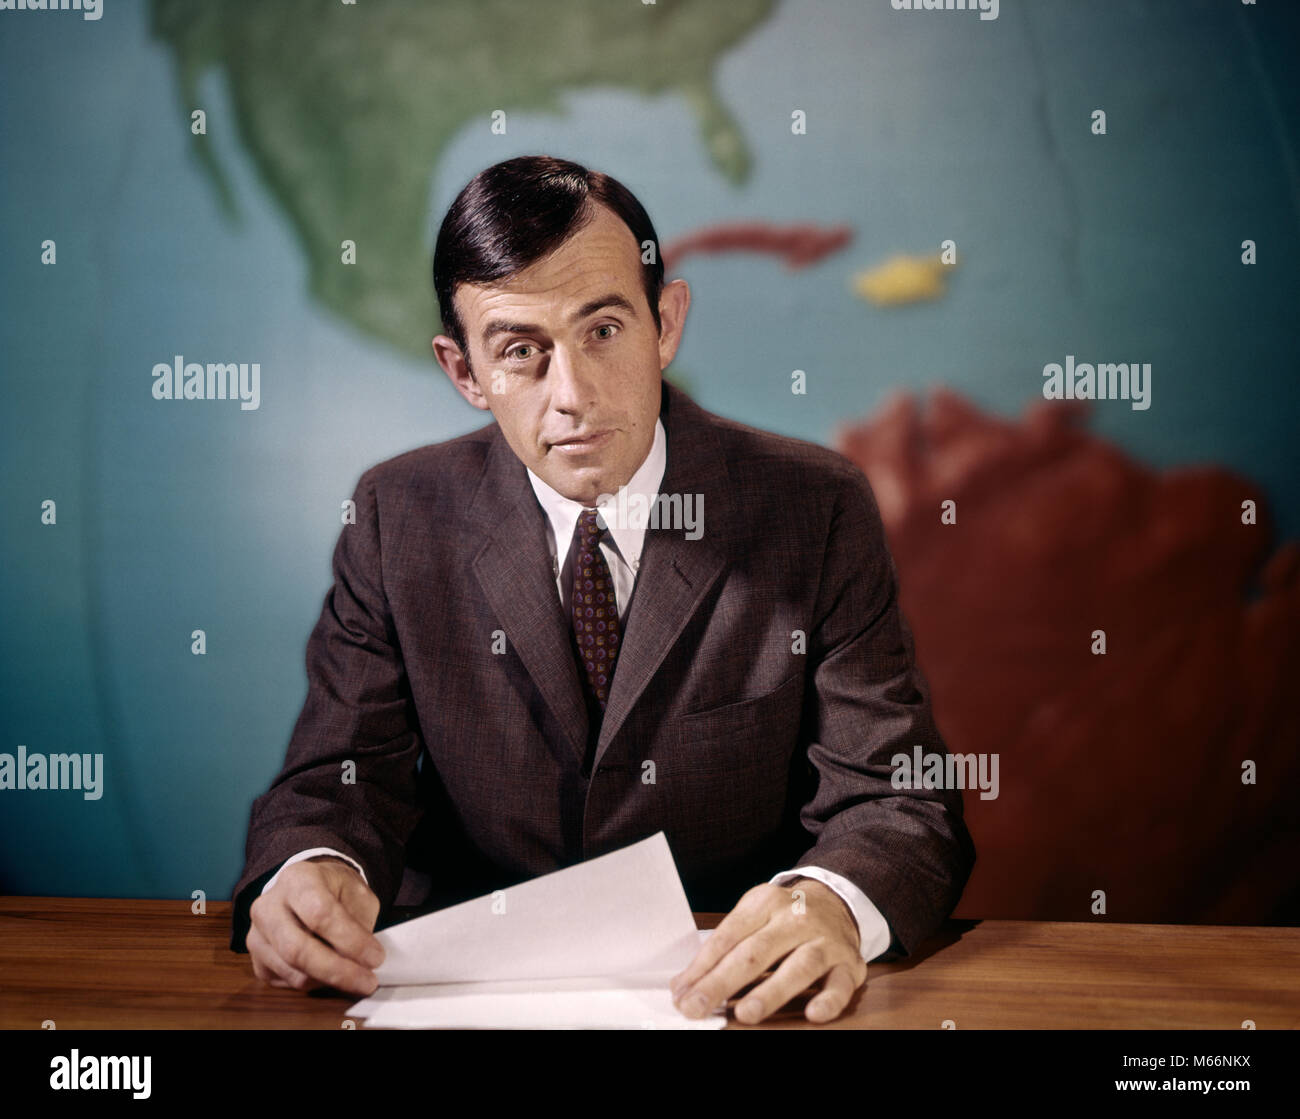 1960s NEWSMAN LOOKING AT CAMERA READING NEWS FROM PAPERS SPEAKING INTO MICROPHONE LOOKING AT CAMERA WORLD MAP BACKGROUND - kt7201 HAR001 HARS INDOORS ENTERTAINMENT NOSTALGIA 35-40 YEARS 40-45 YEARS BROADCASTING ANNOUNCER COMMUNICATE TIES COMMUNICATIONS JOURNALISM MALES MID-ADULT MID-ADULT MAN NEWSMAN CAUCASIAN ETHNICITY LOOKING AT CAMERA OCCUPATIONS OLD FASHIONED PERSONS WORKER WORKING Stock Photo